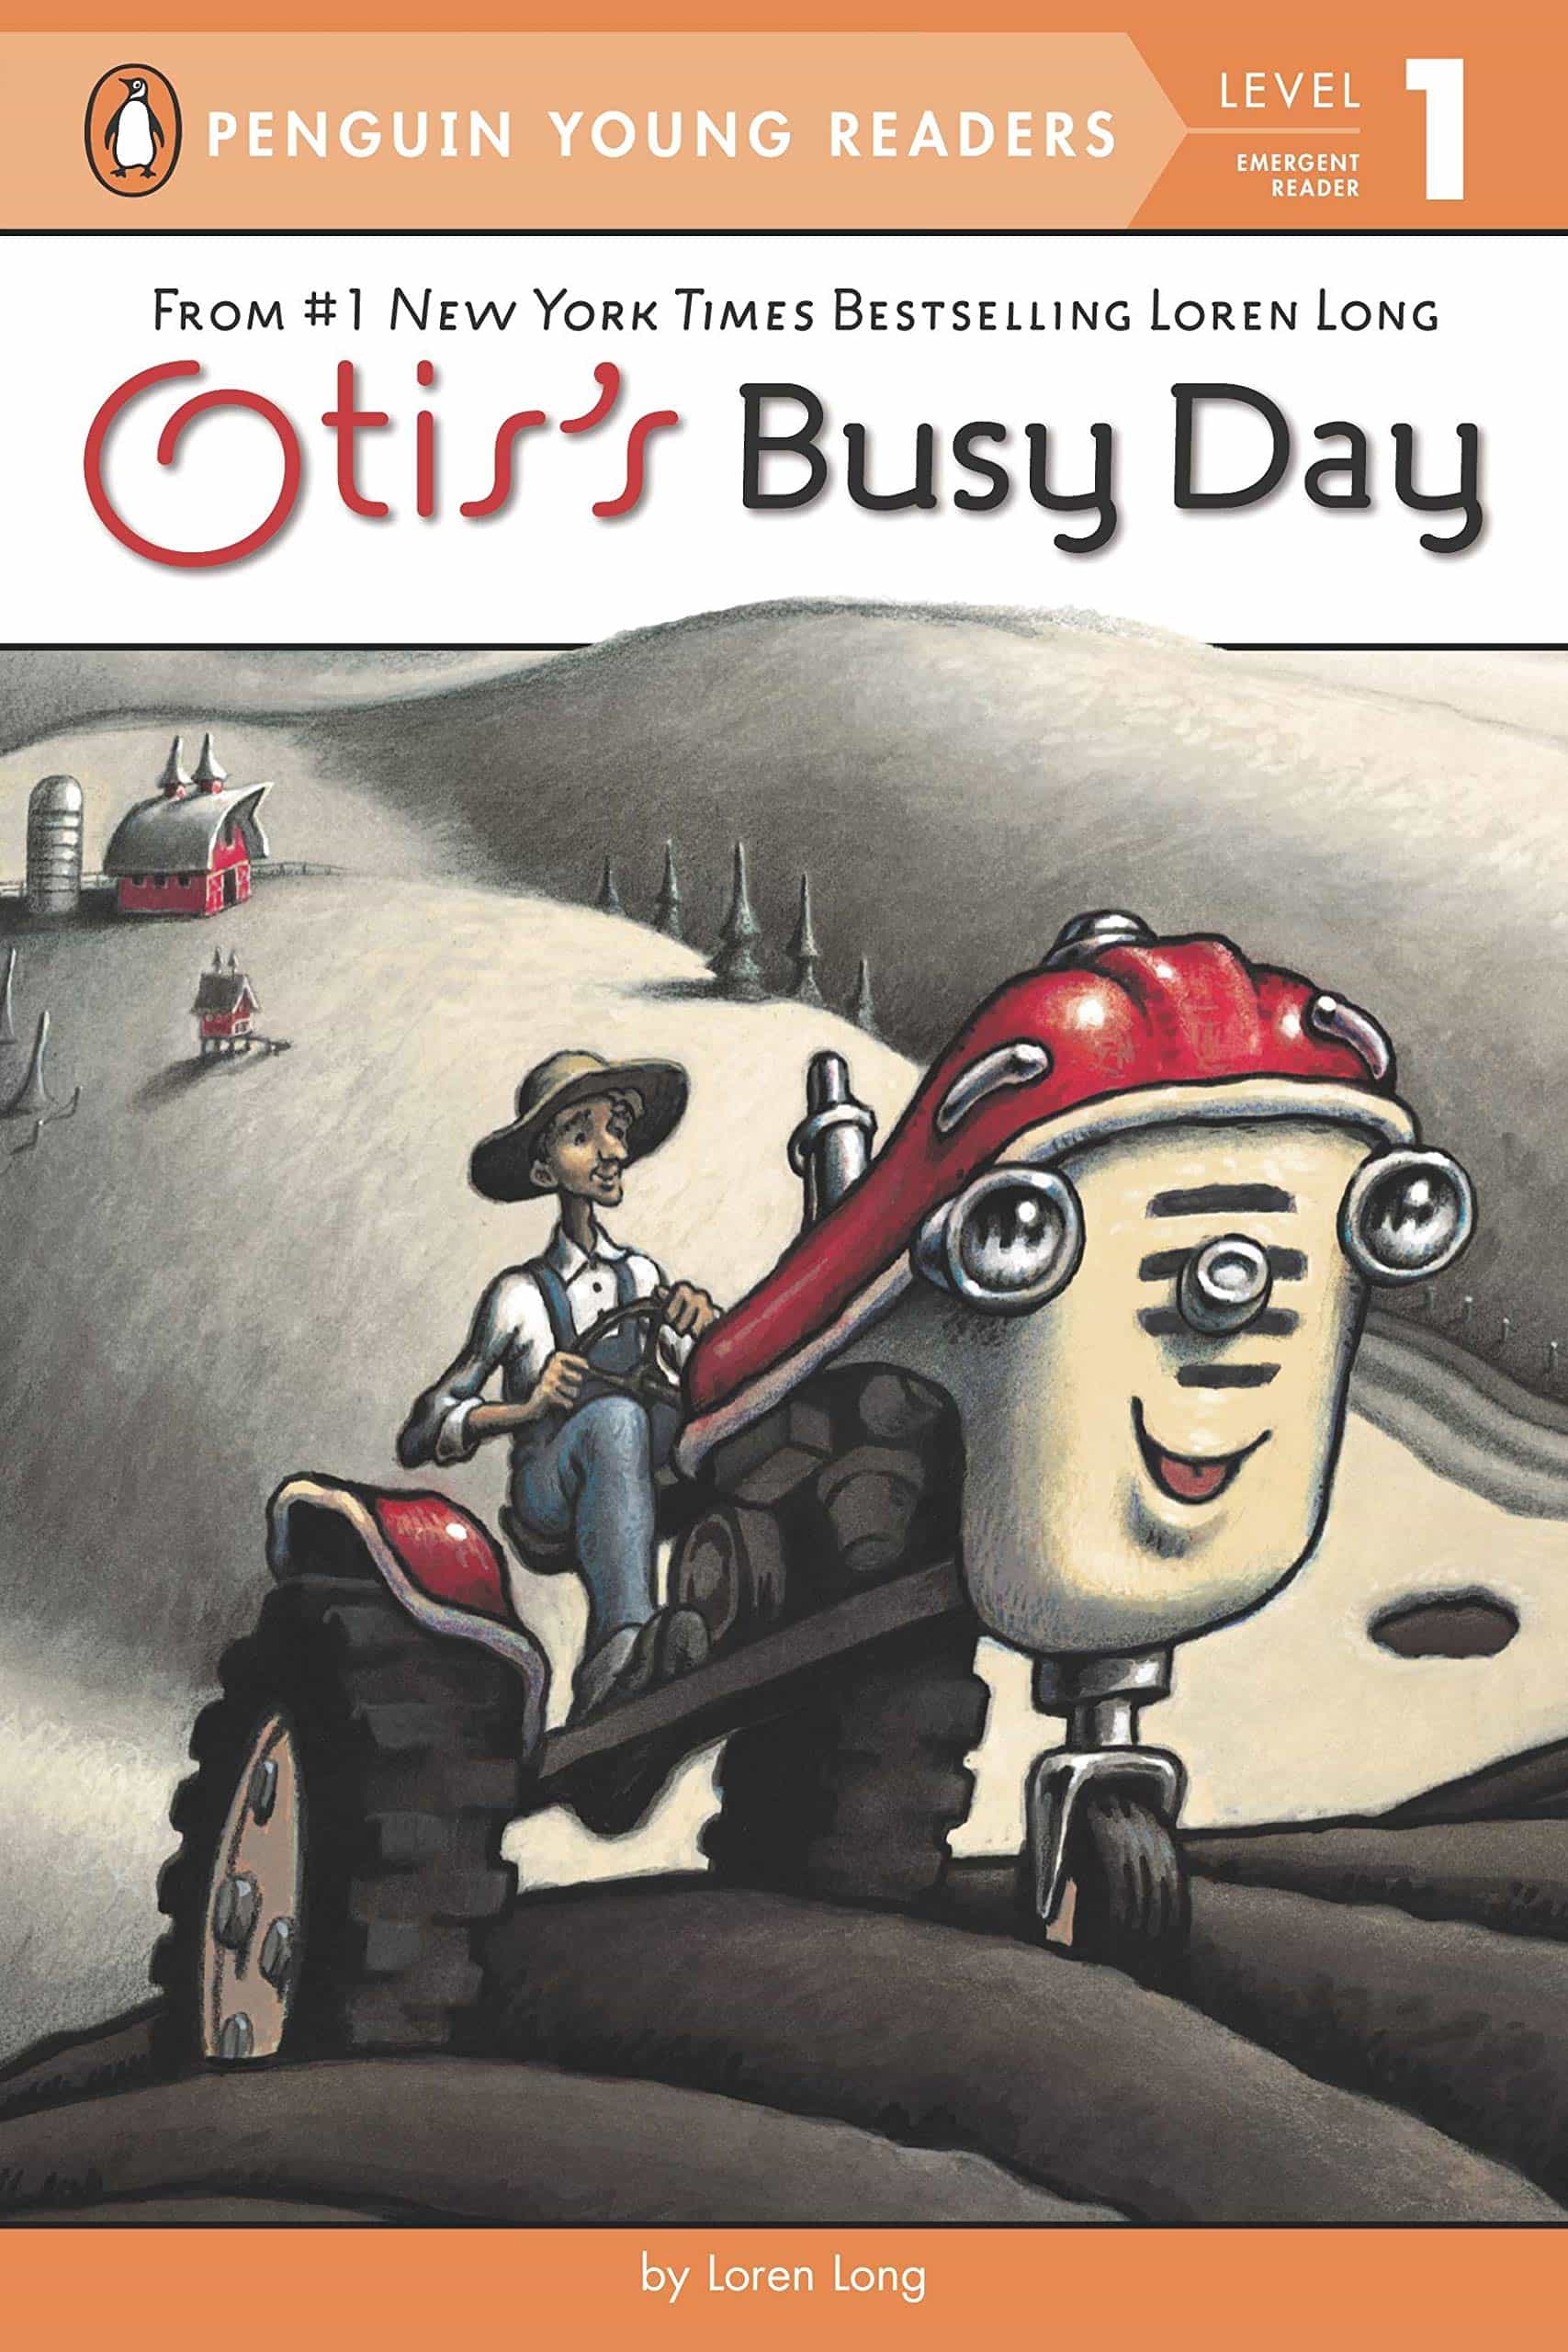 The cover for the book Otis's Busy Day